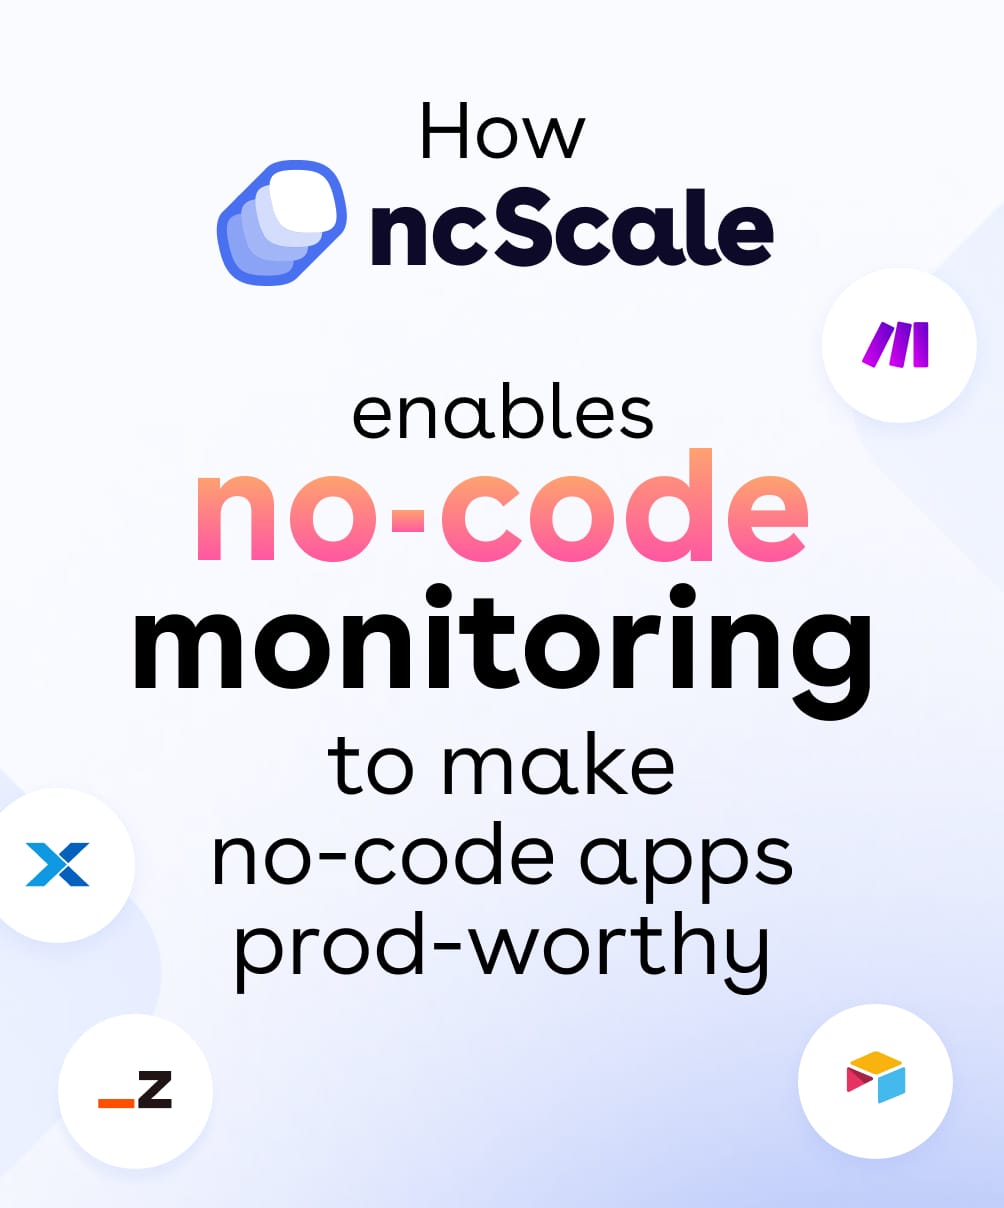 How ncScale enables no-code monitoring to make no-code apps prod-worthy